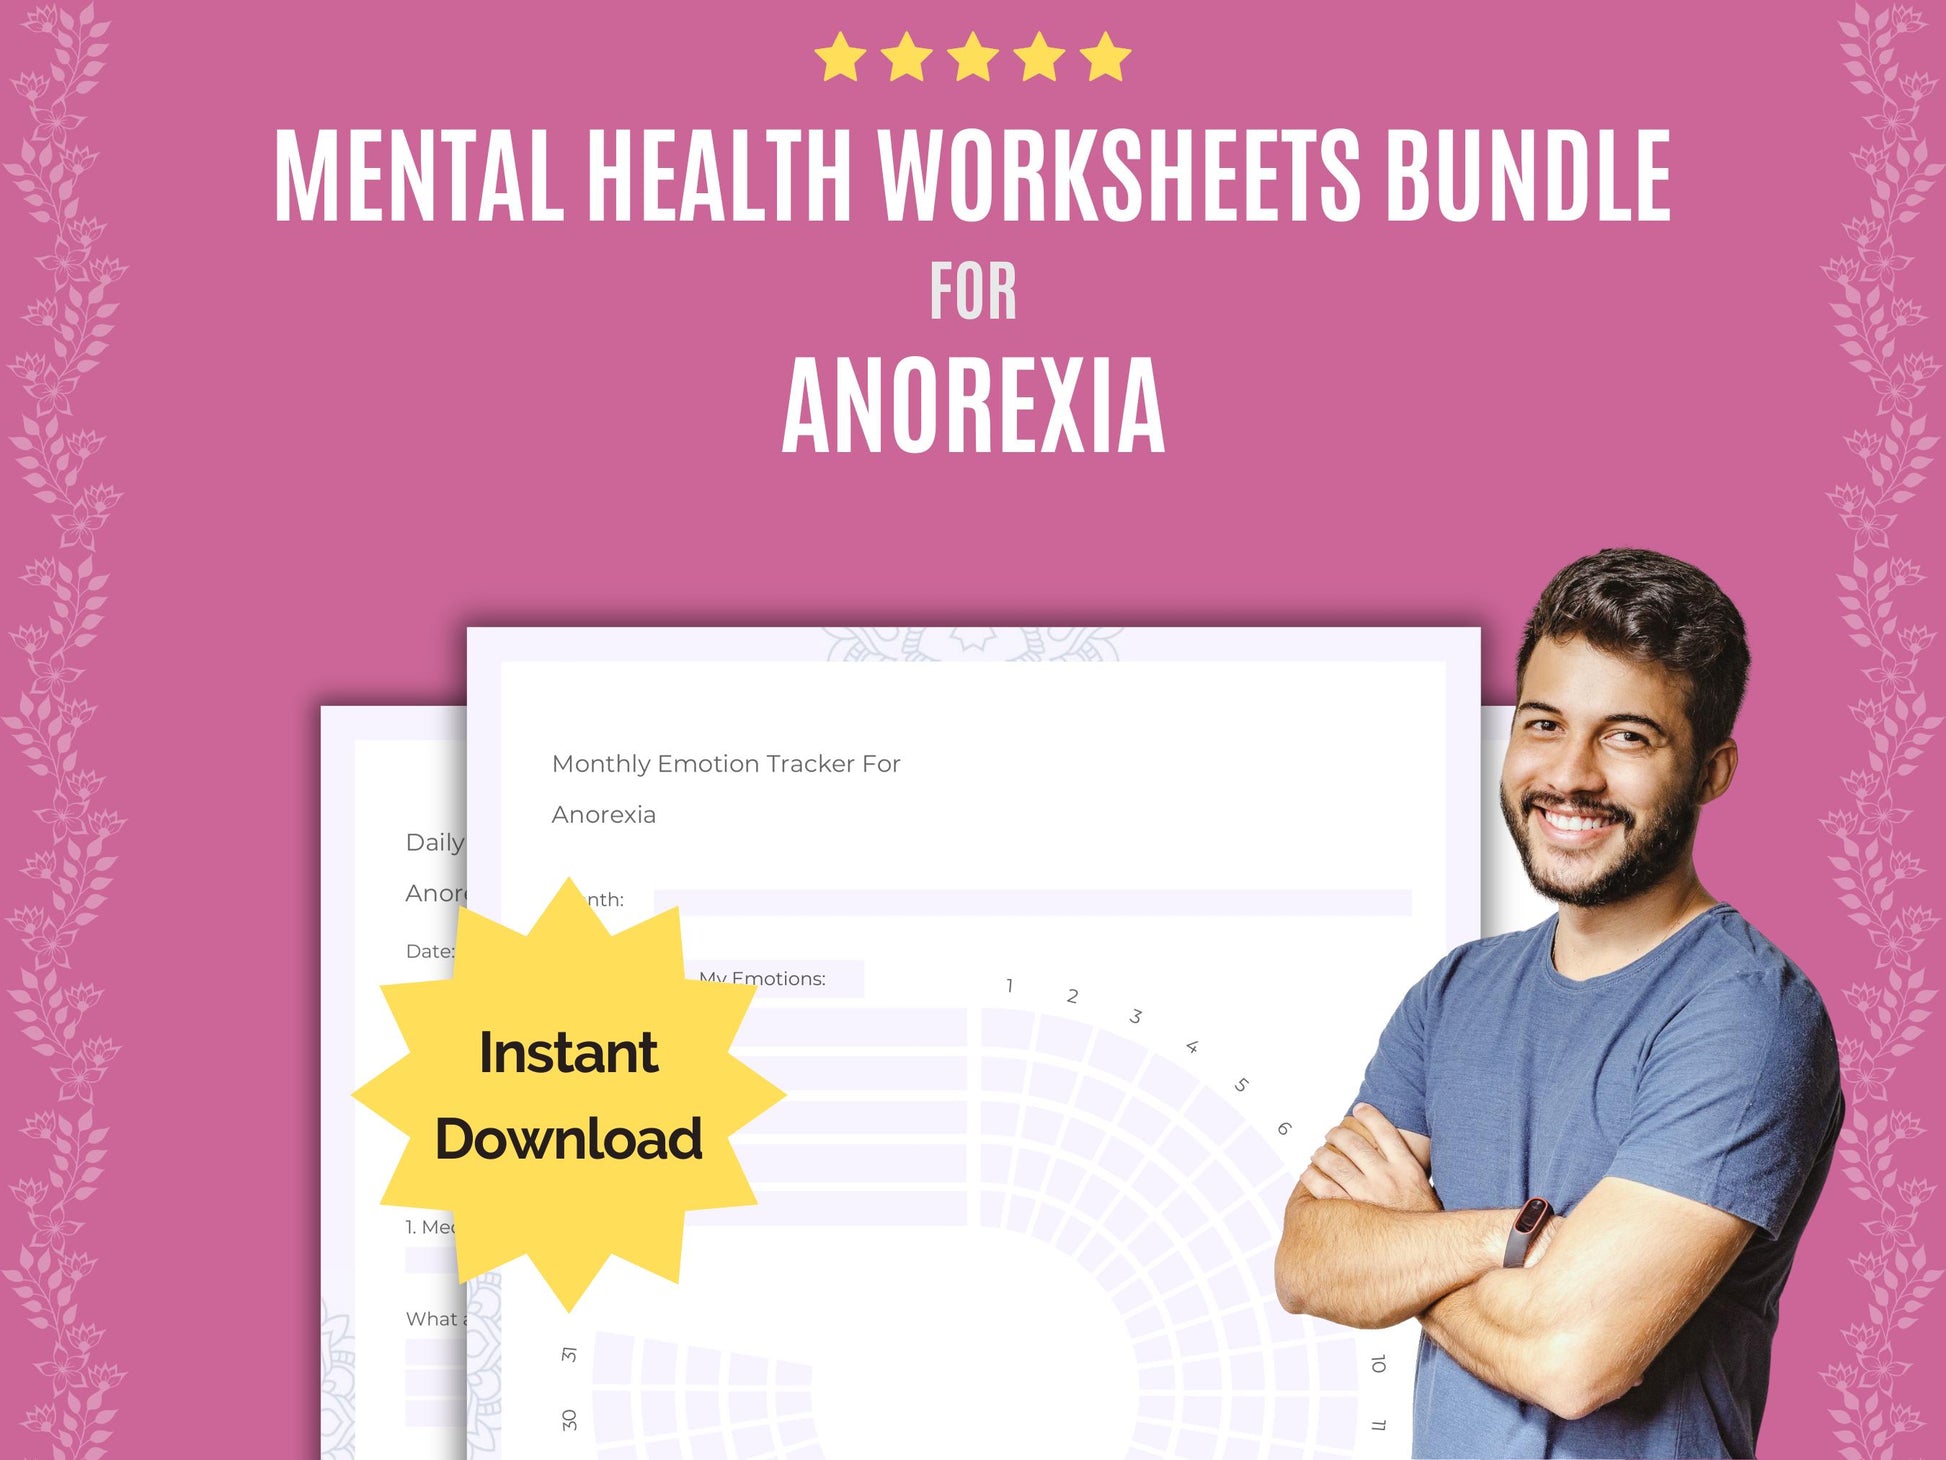 Anorexia Tools, Anorexia Journals, Anorexia Workbooks, Goal Setting, Anorexia Therapy, Anorexia Cheat Sheet, Anorexia Journaling, Anorexia Notes, Anorexia Counseling, Anorexia Resources, Anorexia Templates, Anorexia Planners, Anorexia Mental Health